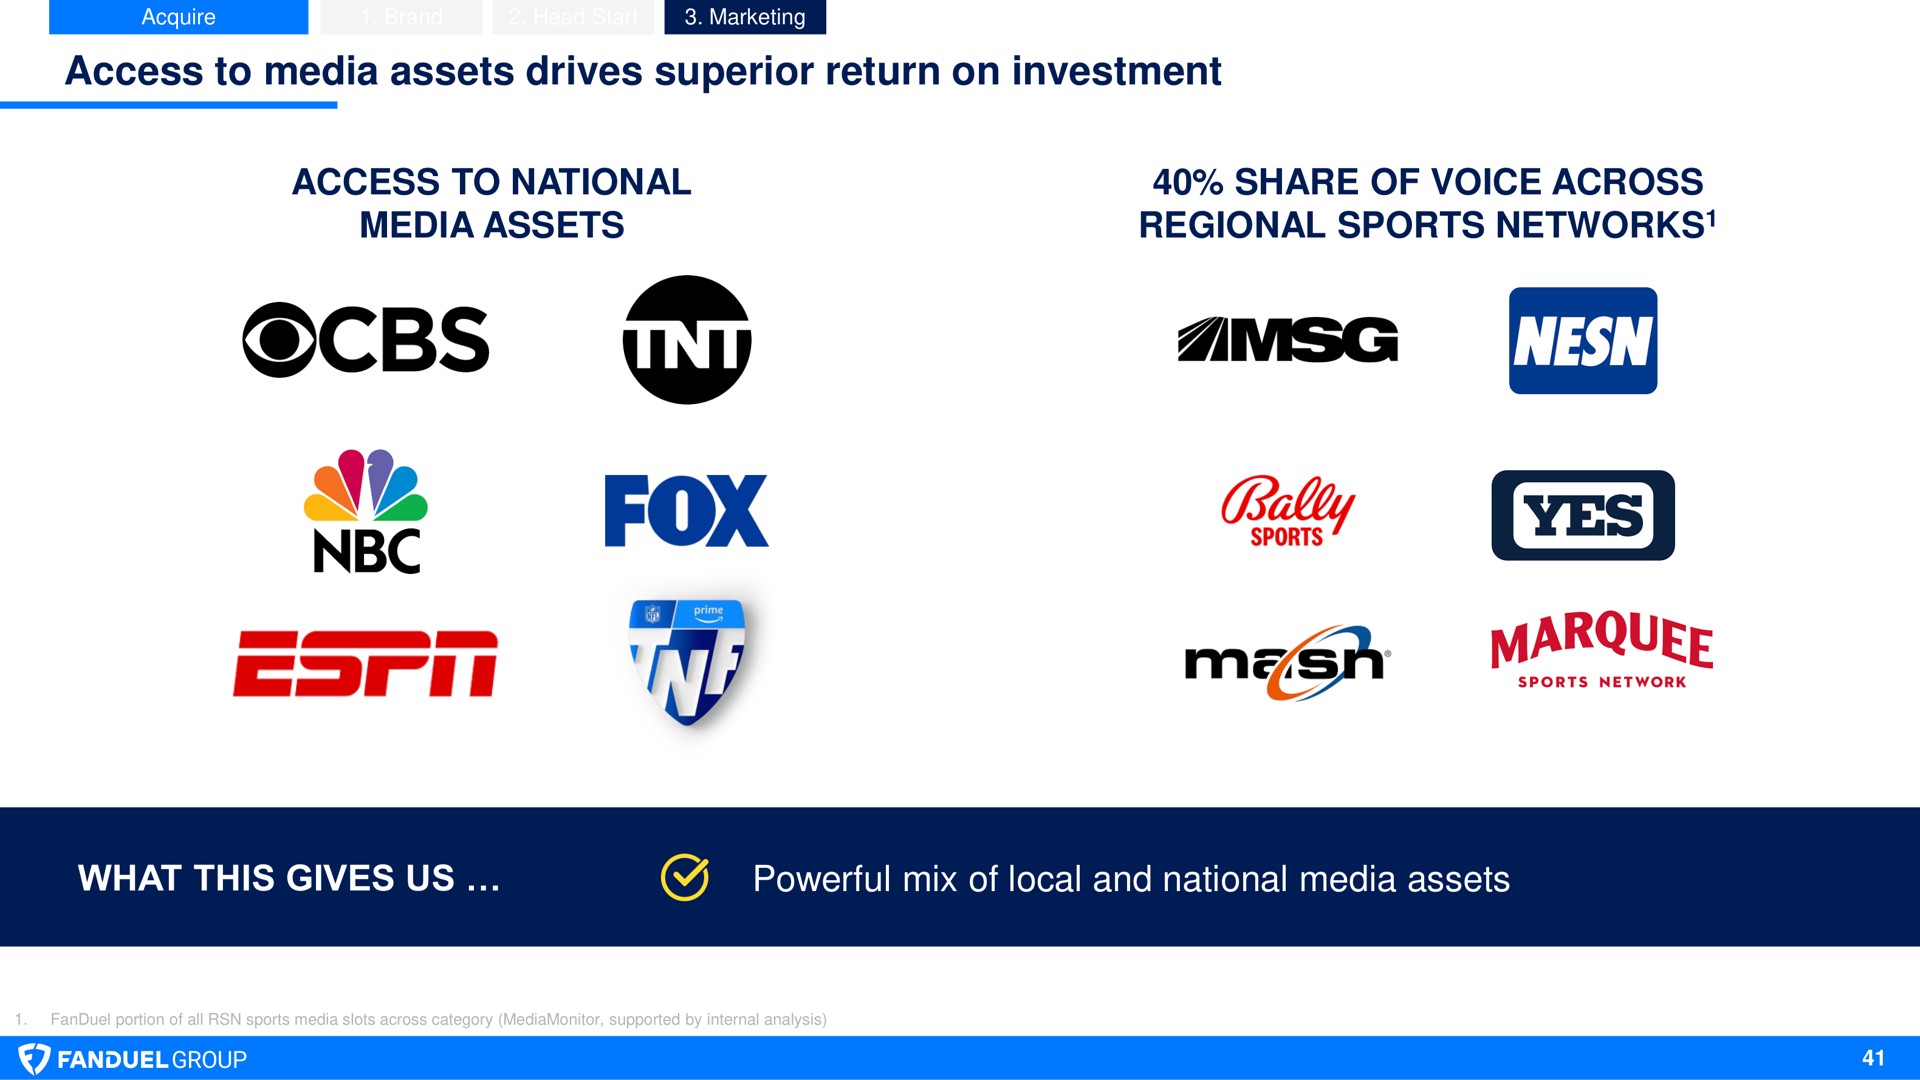 access to media assets drives superior return on investment access to national media assets share of voice across regional sports networks what this gives us powerful mix of local and national media assets we fox i res marquee pat | Flutter